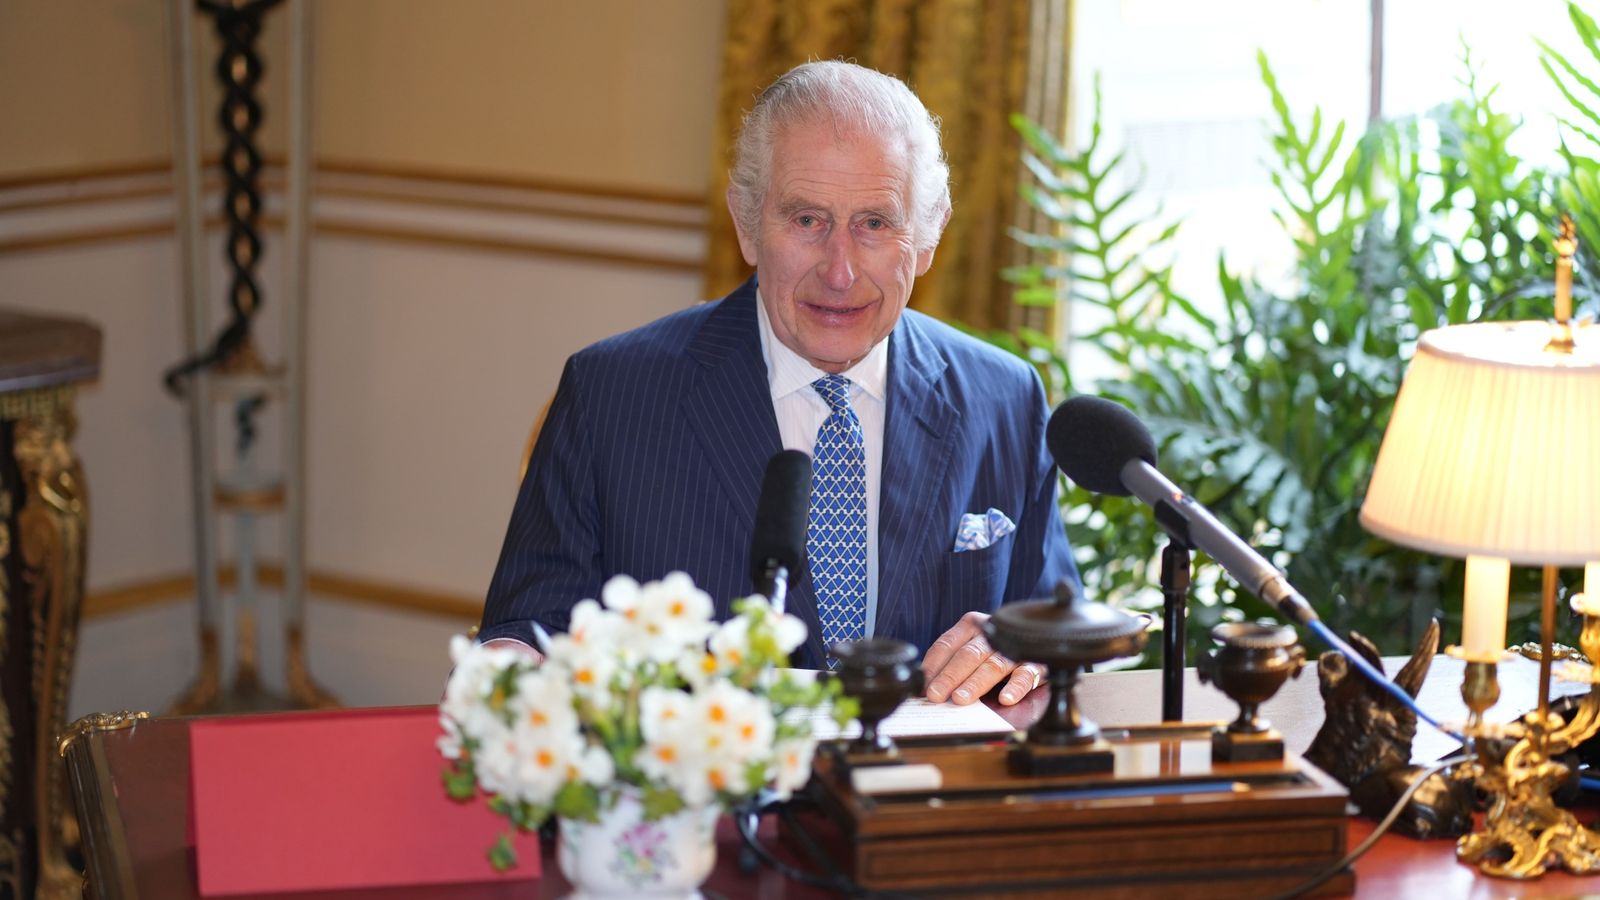 King stresses importance of friendship 'in a time of need' in Easter message